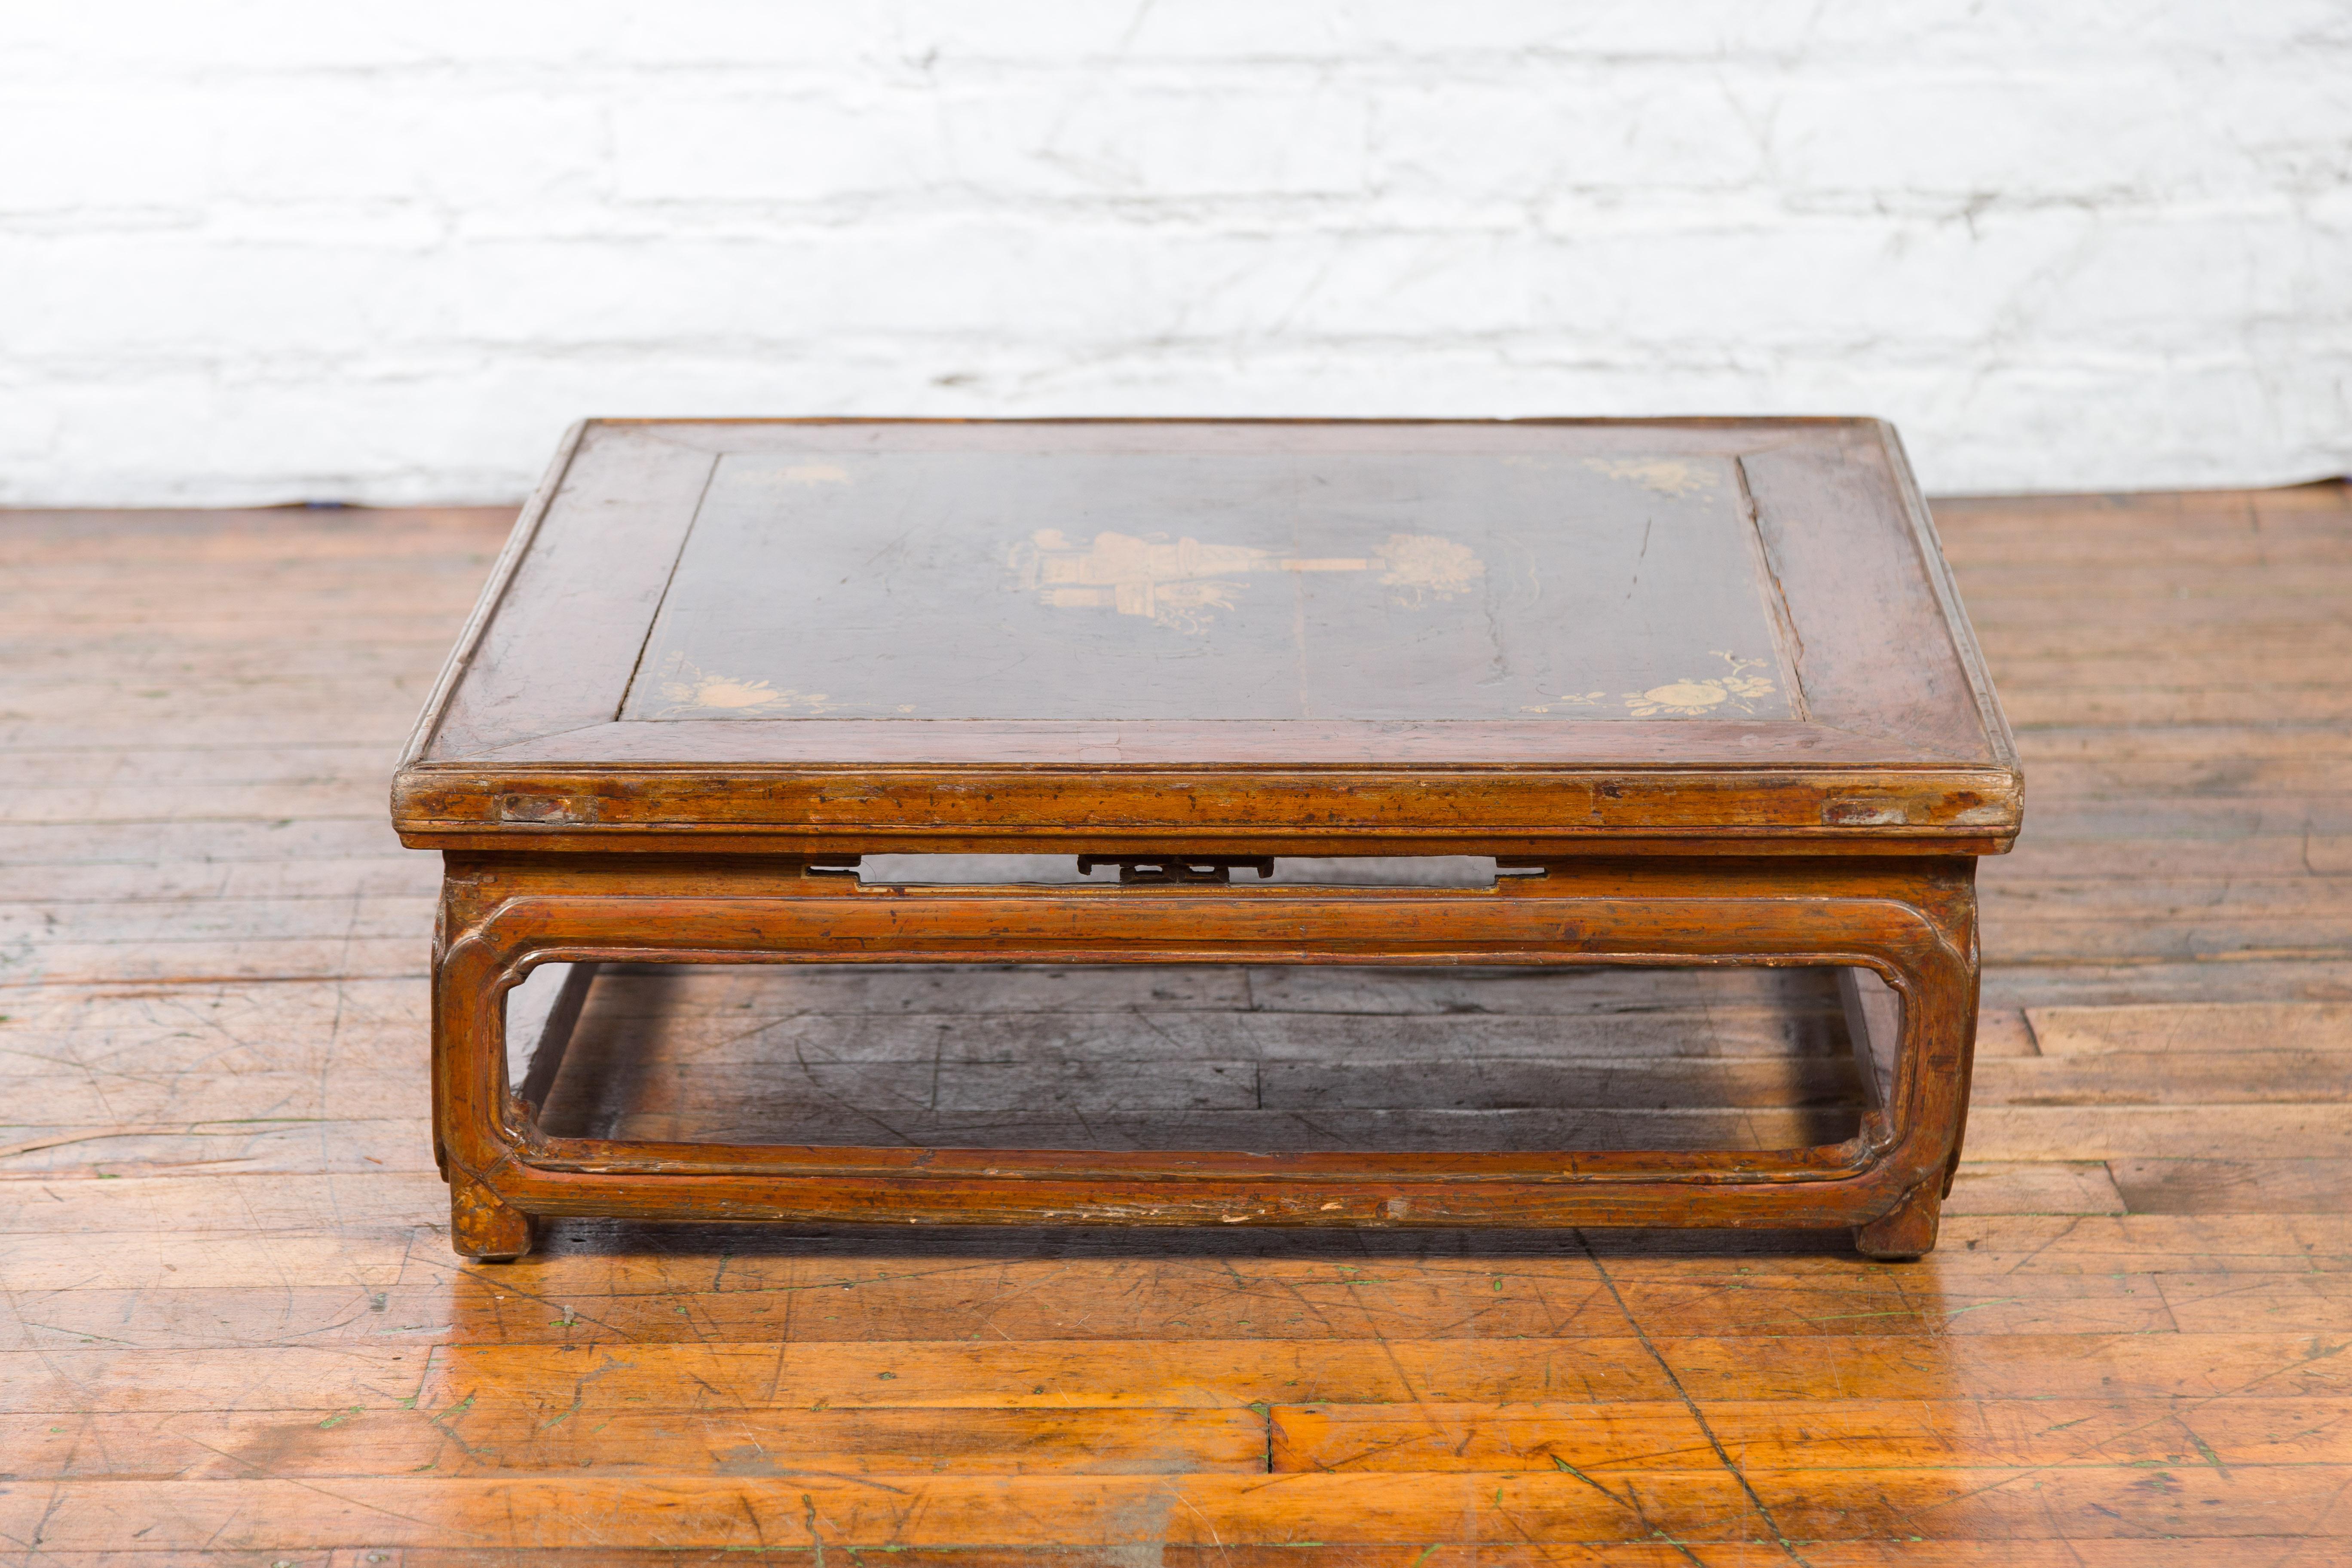 Qing Dynasty 19th Century Chinese Low Kang Coffee Table with Painted Décor For Sale 7